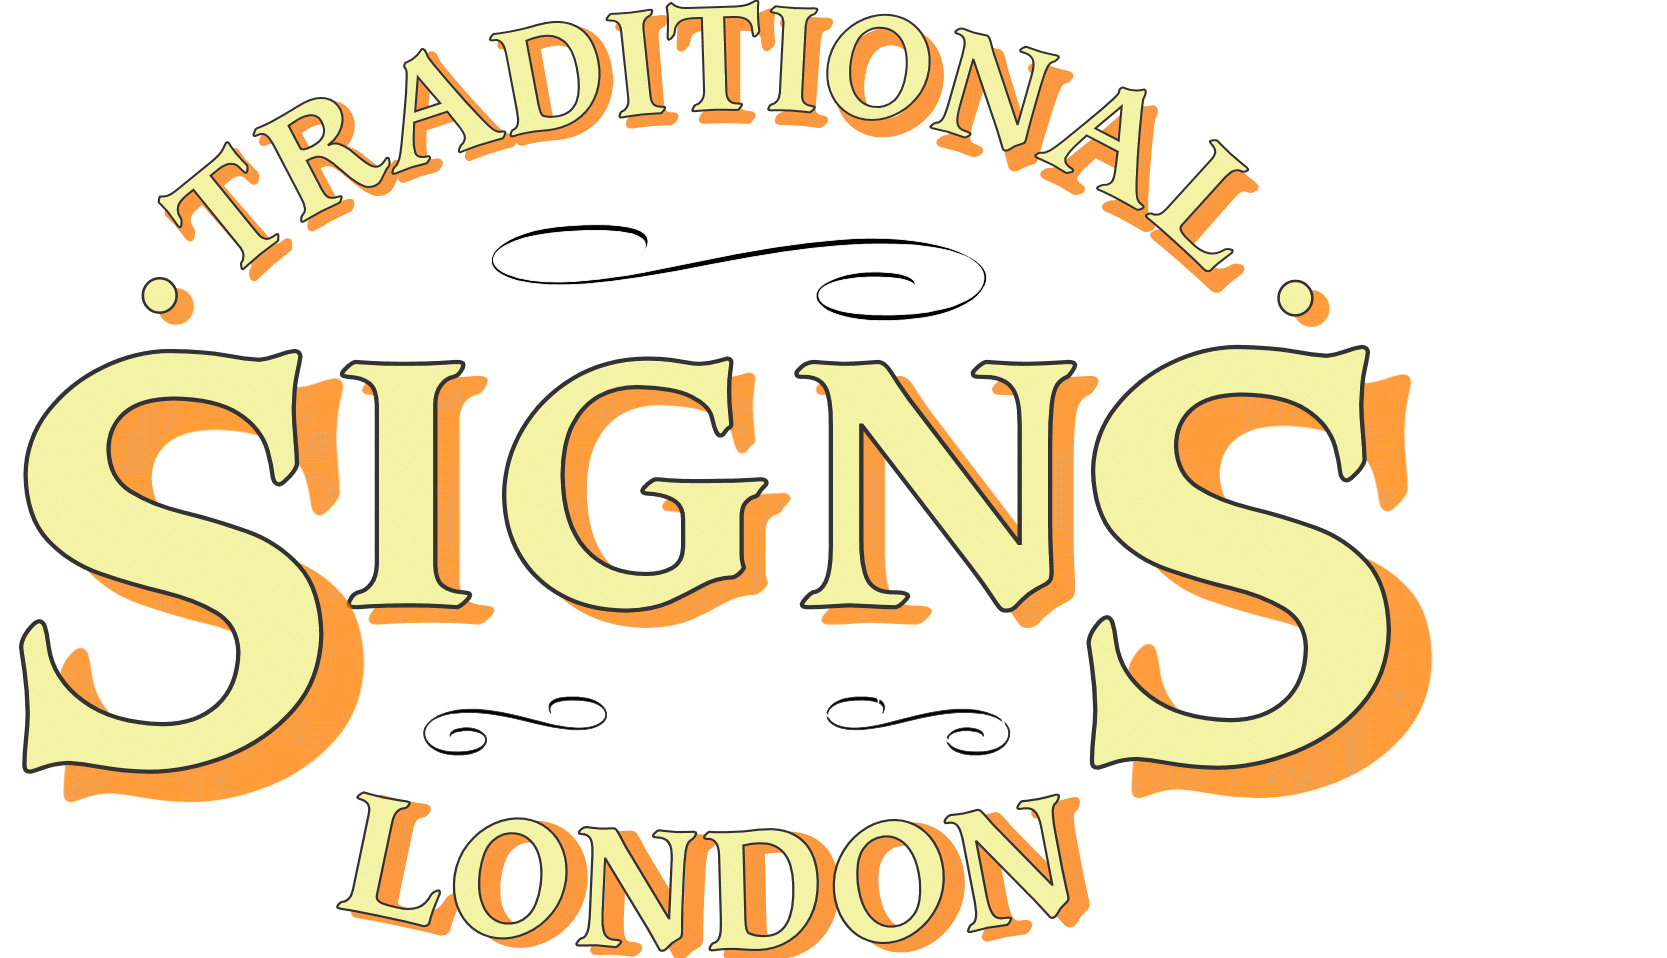 Traditional Signs of London logo